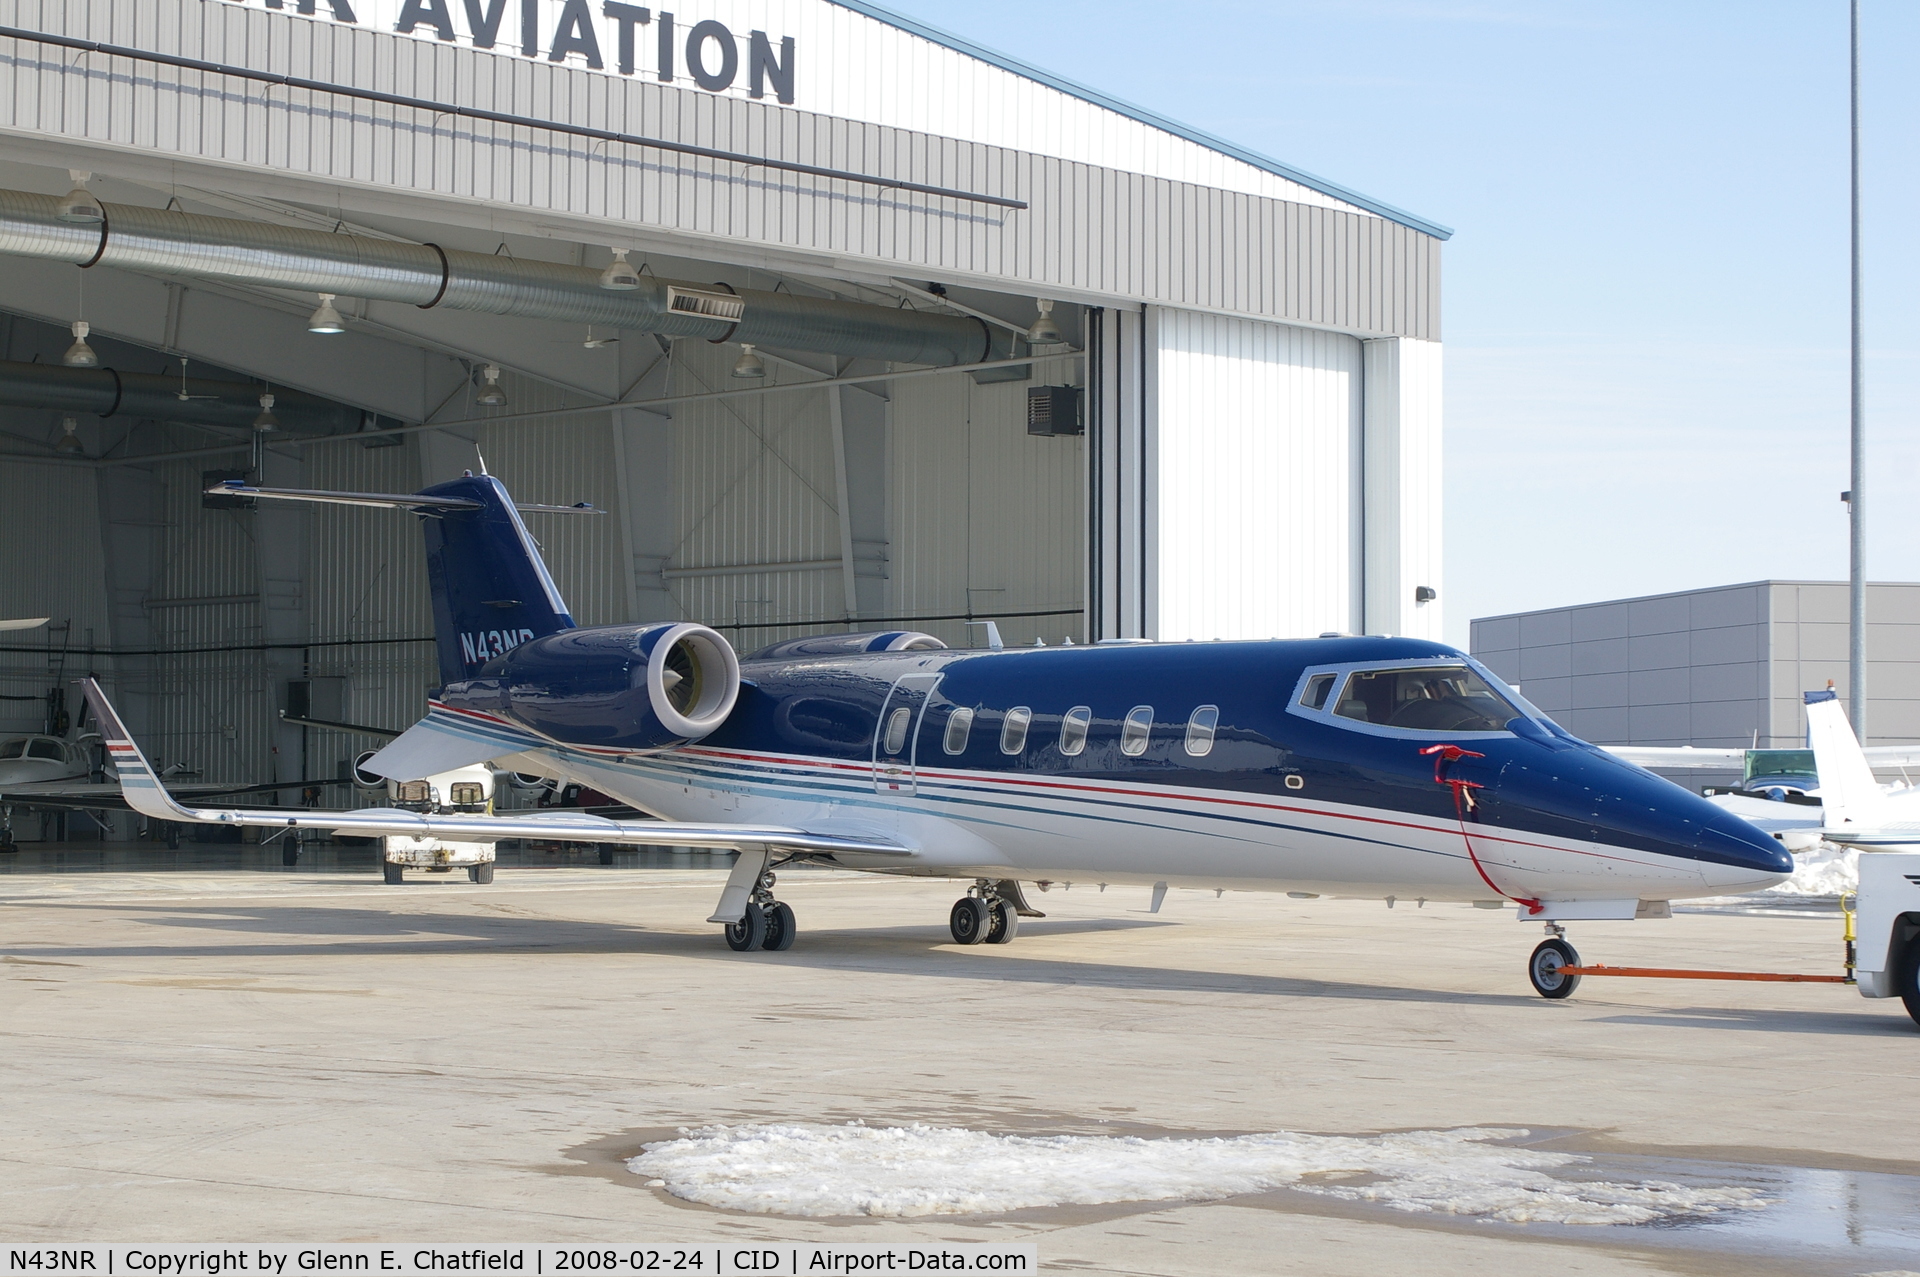 N43NR, 1994 Learjet 60 C/N 043, Looking really pretty on the ramp.  Trying to park it in the hangar.